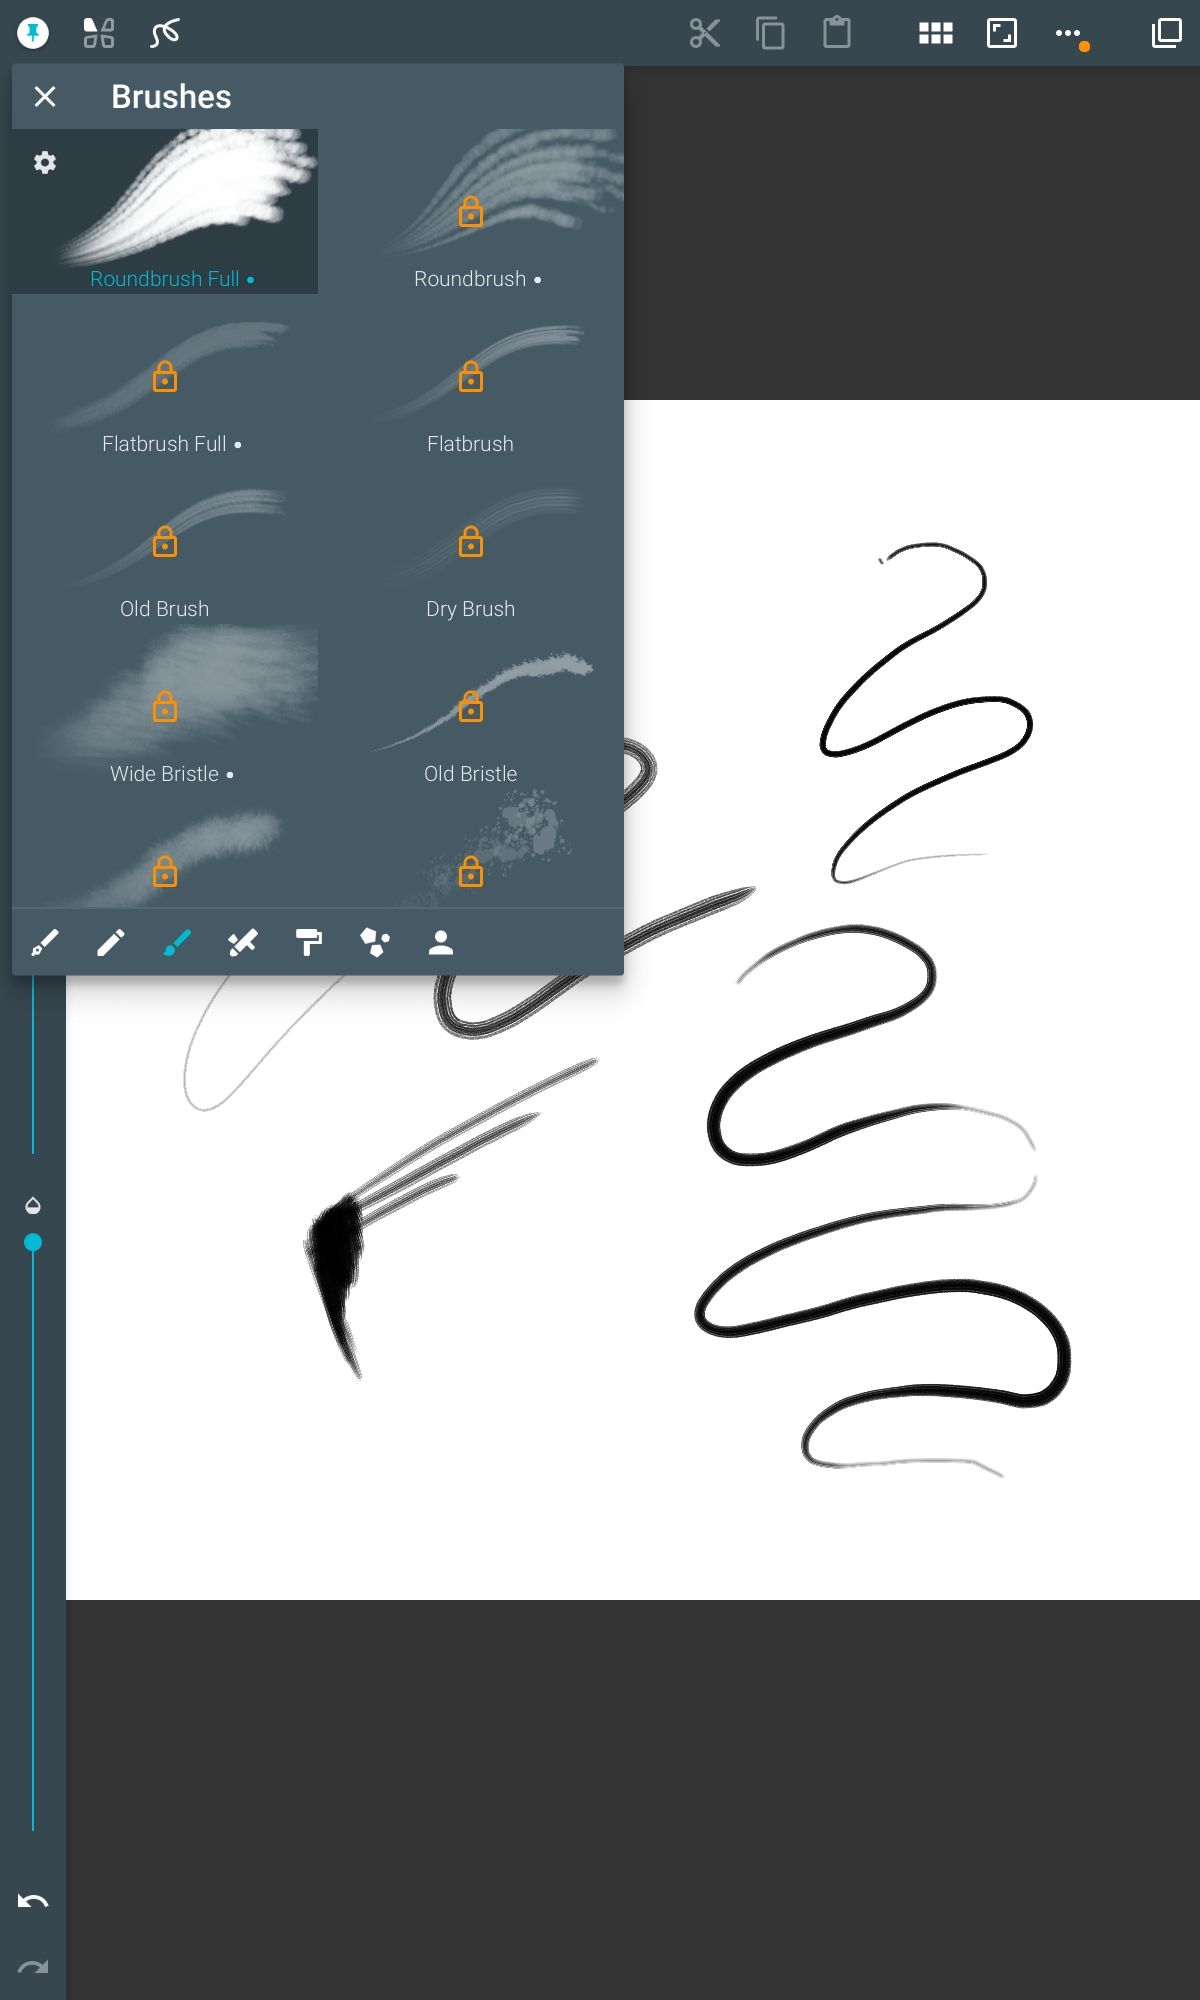 Unlock more of ArtFlow's brushes and features by watching an ad.